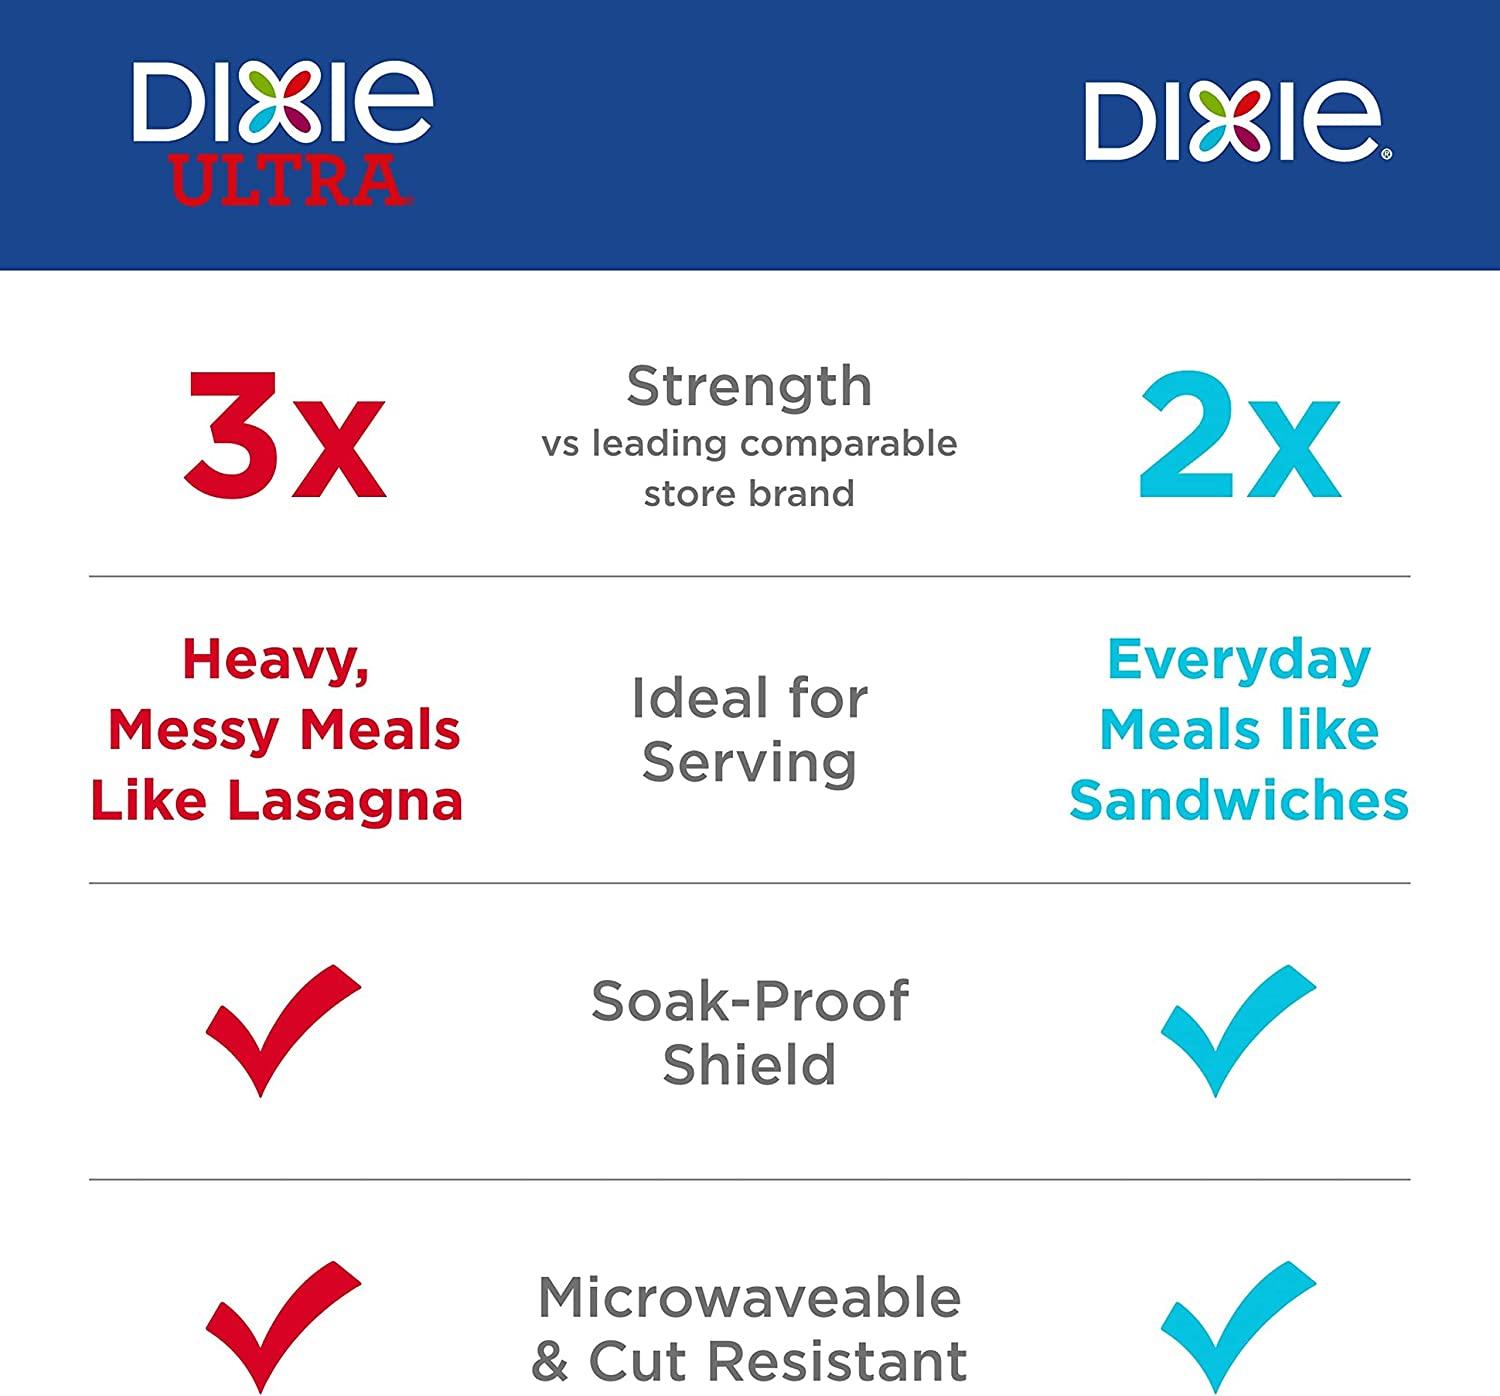 Dixie Ultra Paper Plates, 10 1/16 inch, Dinner Size Printed Disposable Plate,  172 Count (4 Packs of 43 Plates), Packaging and Design May Vary 172 Count  (Pack of 1) 4 Packs of 43 Plates